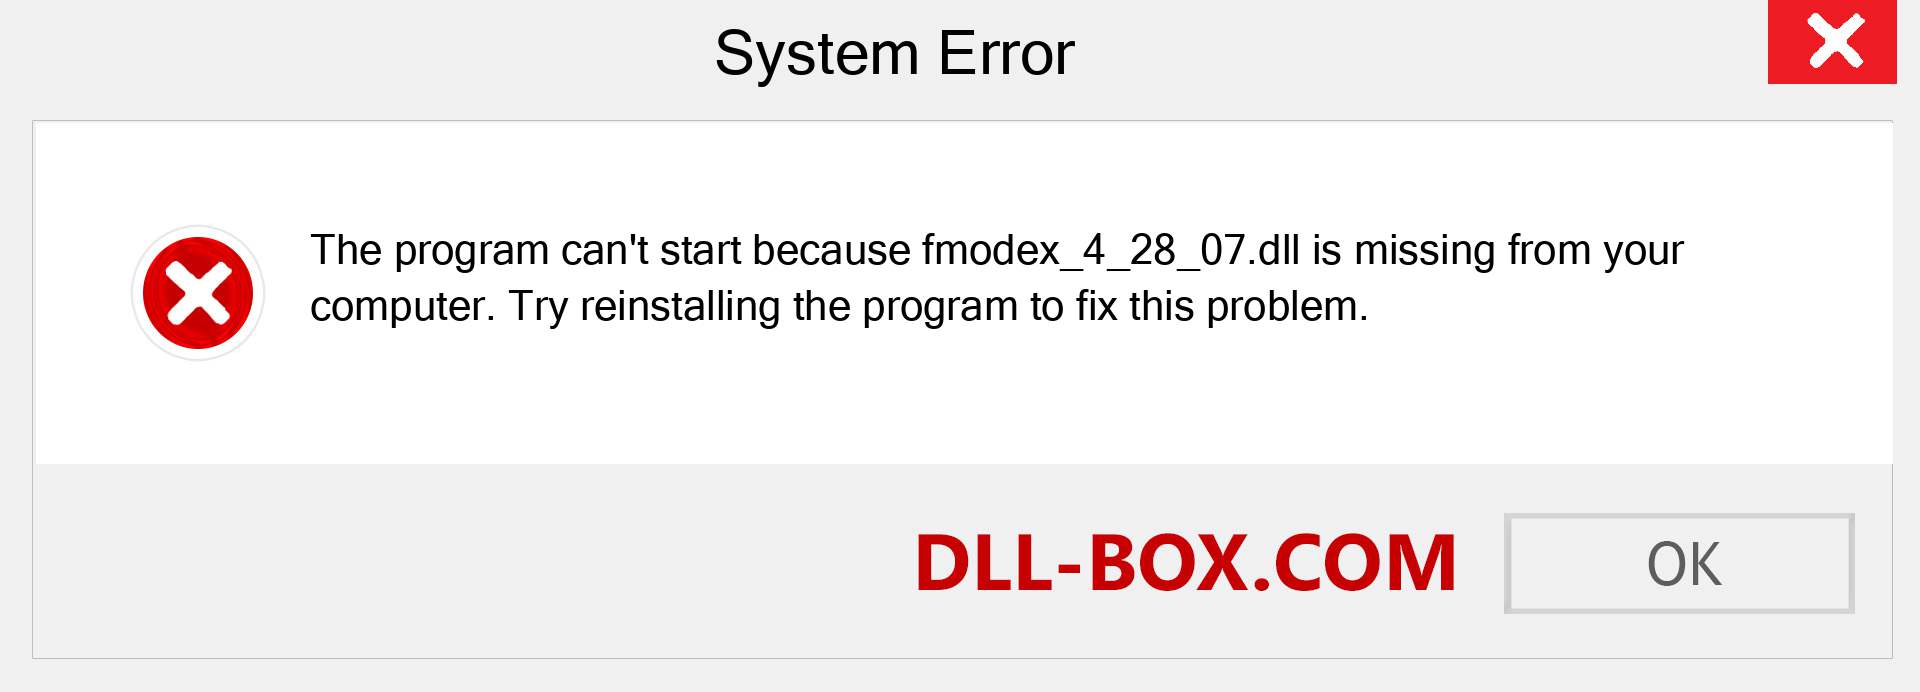  fmodex_4_28_07.dll file is missing?. Download for Windows 7, 8, 10 - Fix  fmodex_4_28_07 dll Missing Error on Windows, photos, images